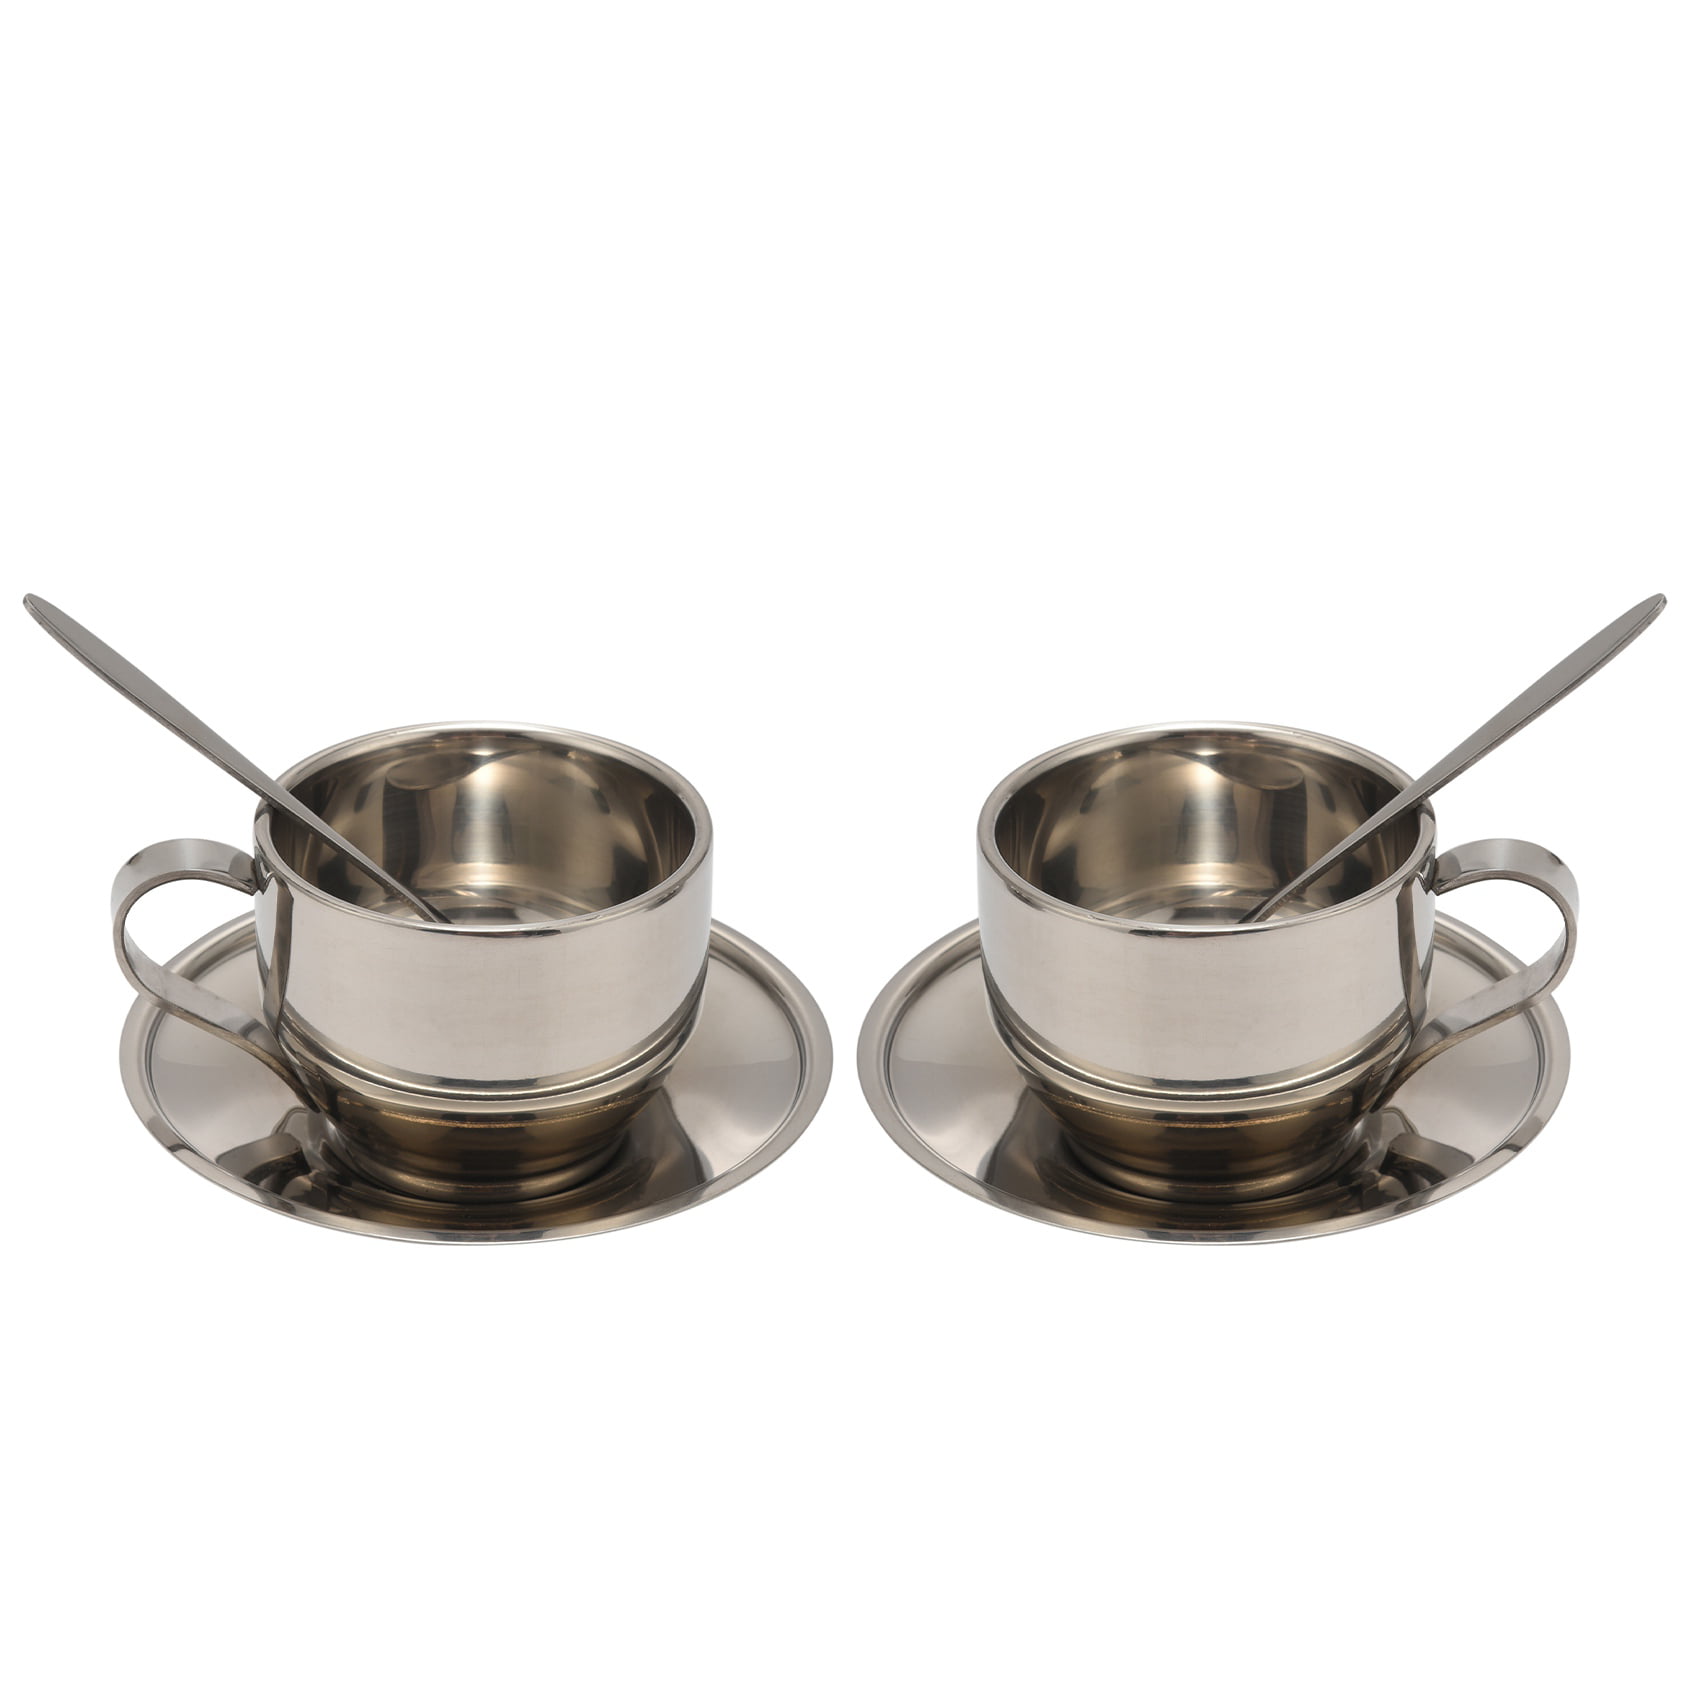 Stainless Steel Espresso Cups Set of 2 - Double Wall Insulated Metal Espresso  Cups Travel Espresso Cup Glass Sets With Spoon